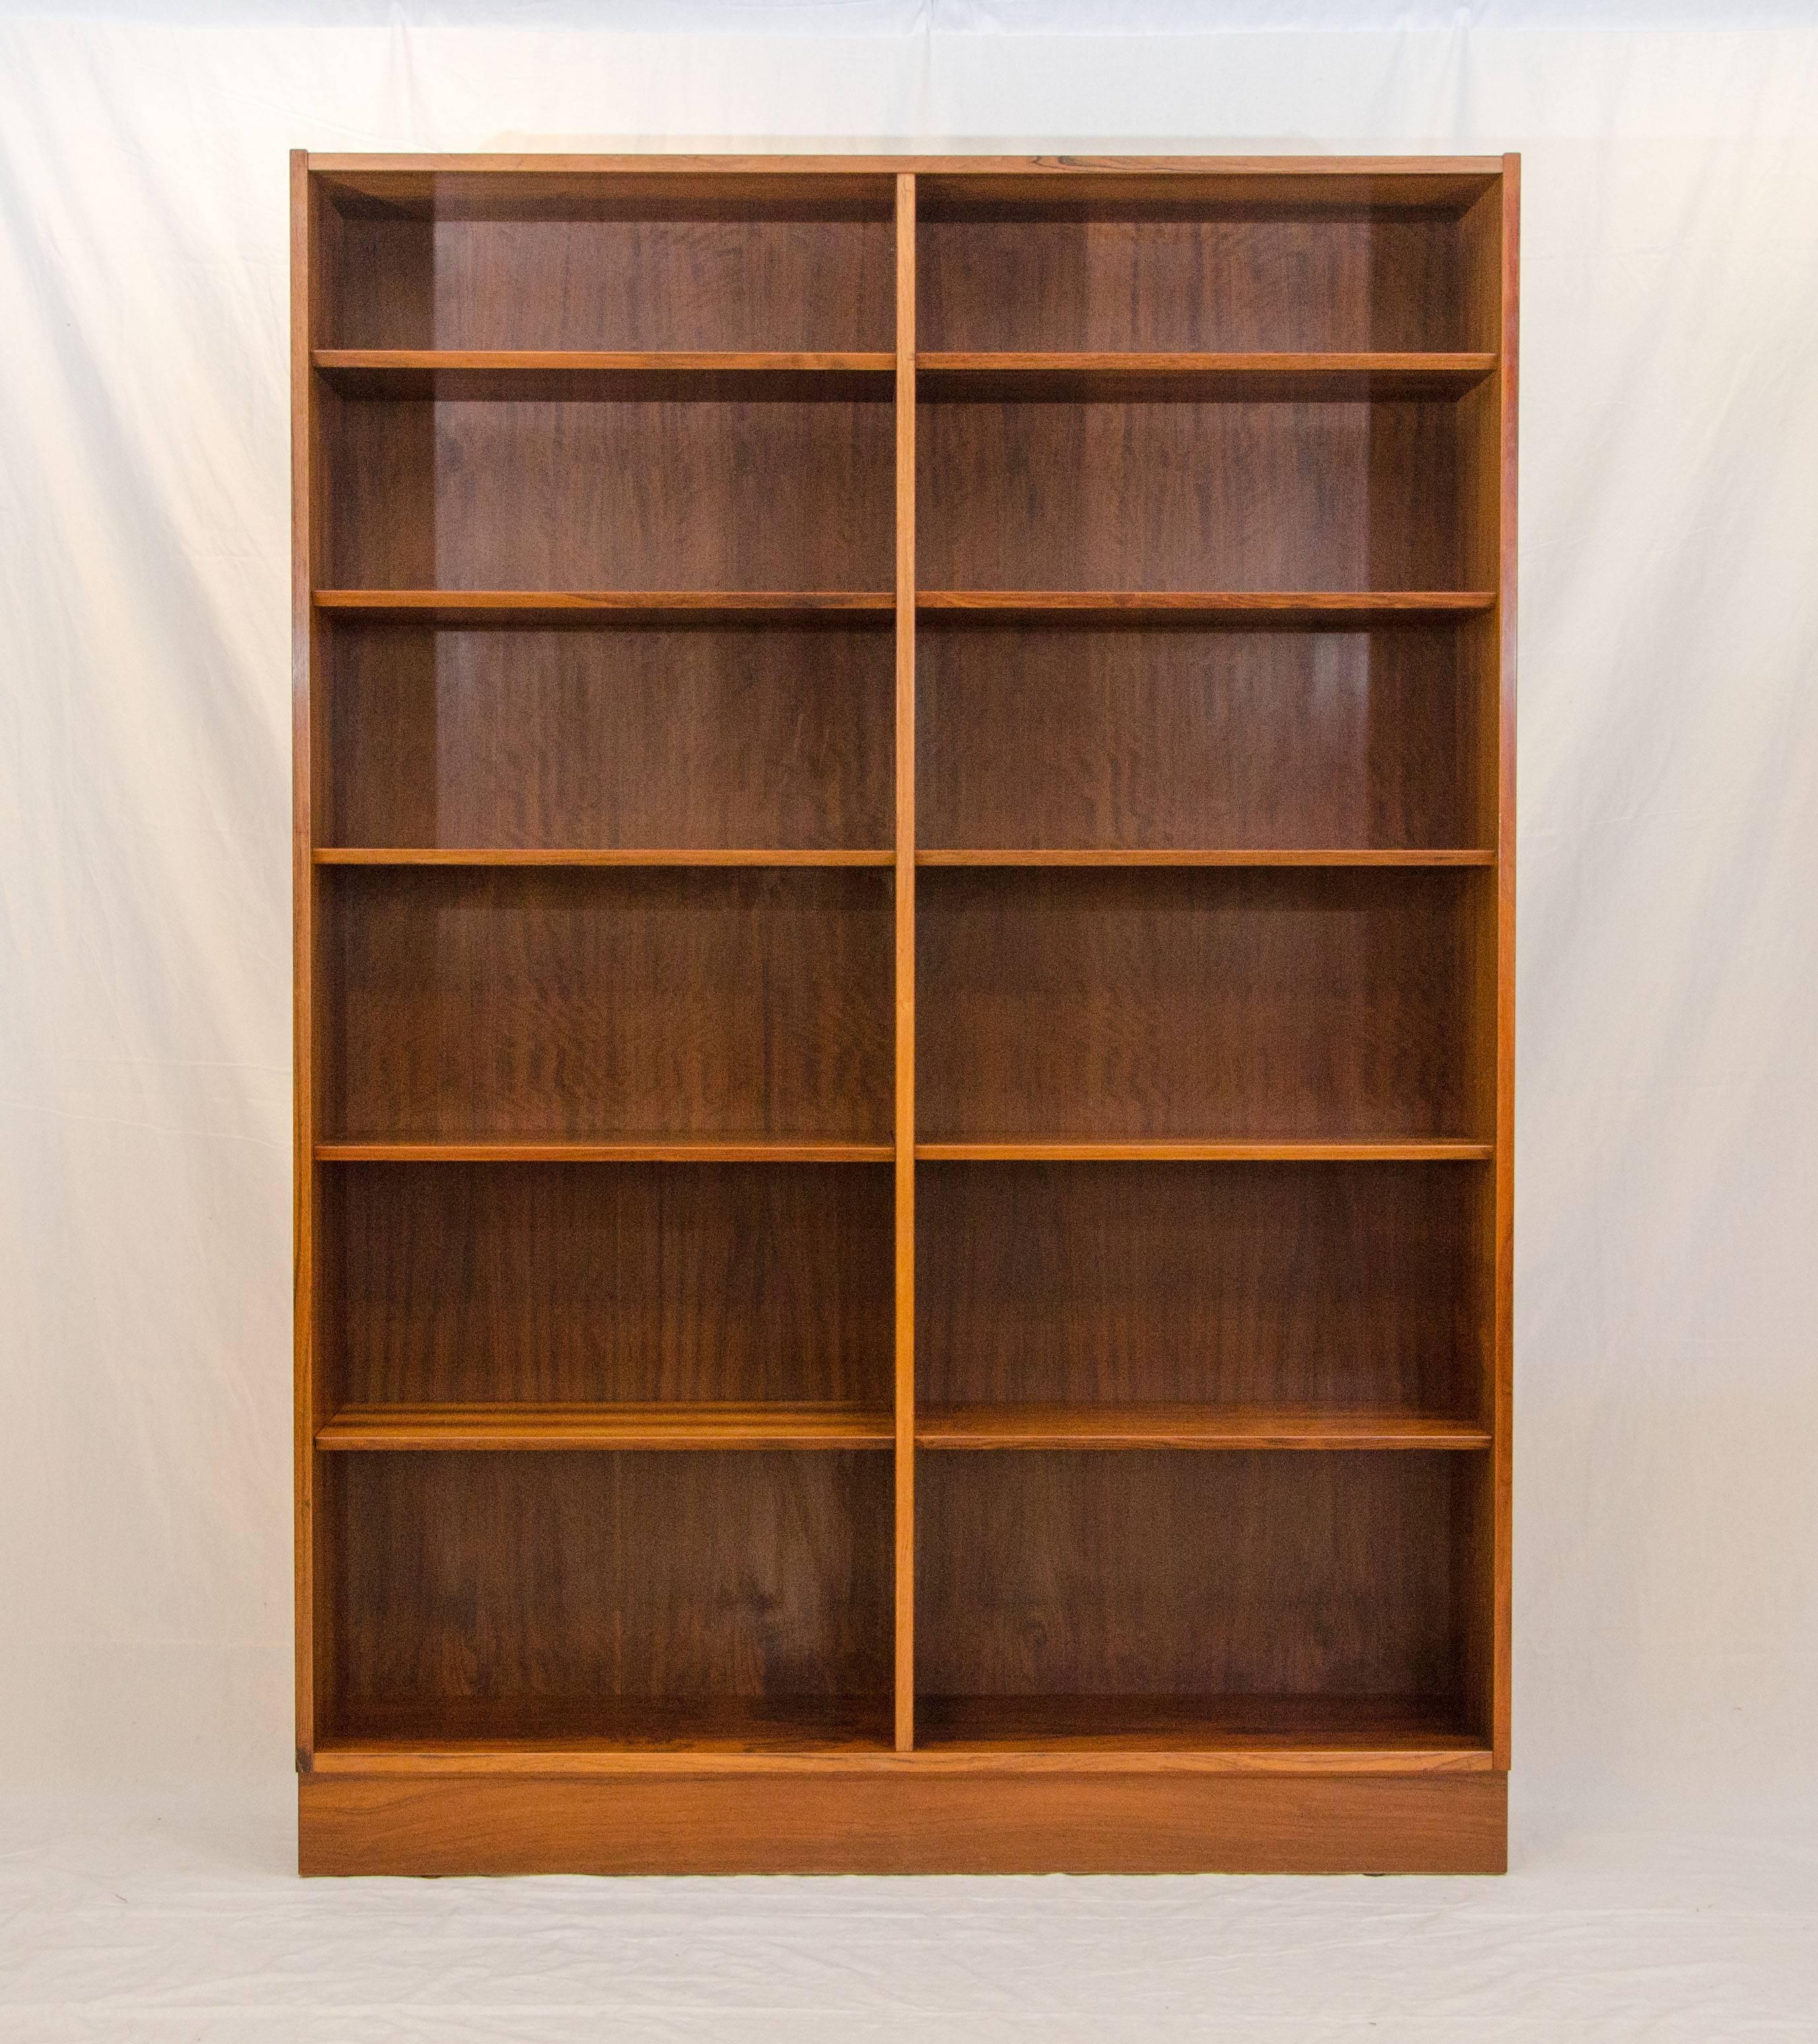 Spacious Brazilian rosewood bookcase with two stationary shelves and eight adjustable ones. The front shelf edges are angled rather than a typical flat front edge. There is a small wire bracket that the shelves slide onto. The rosewood grain